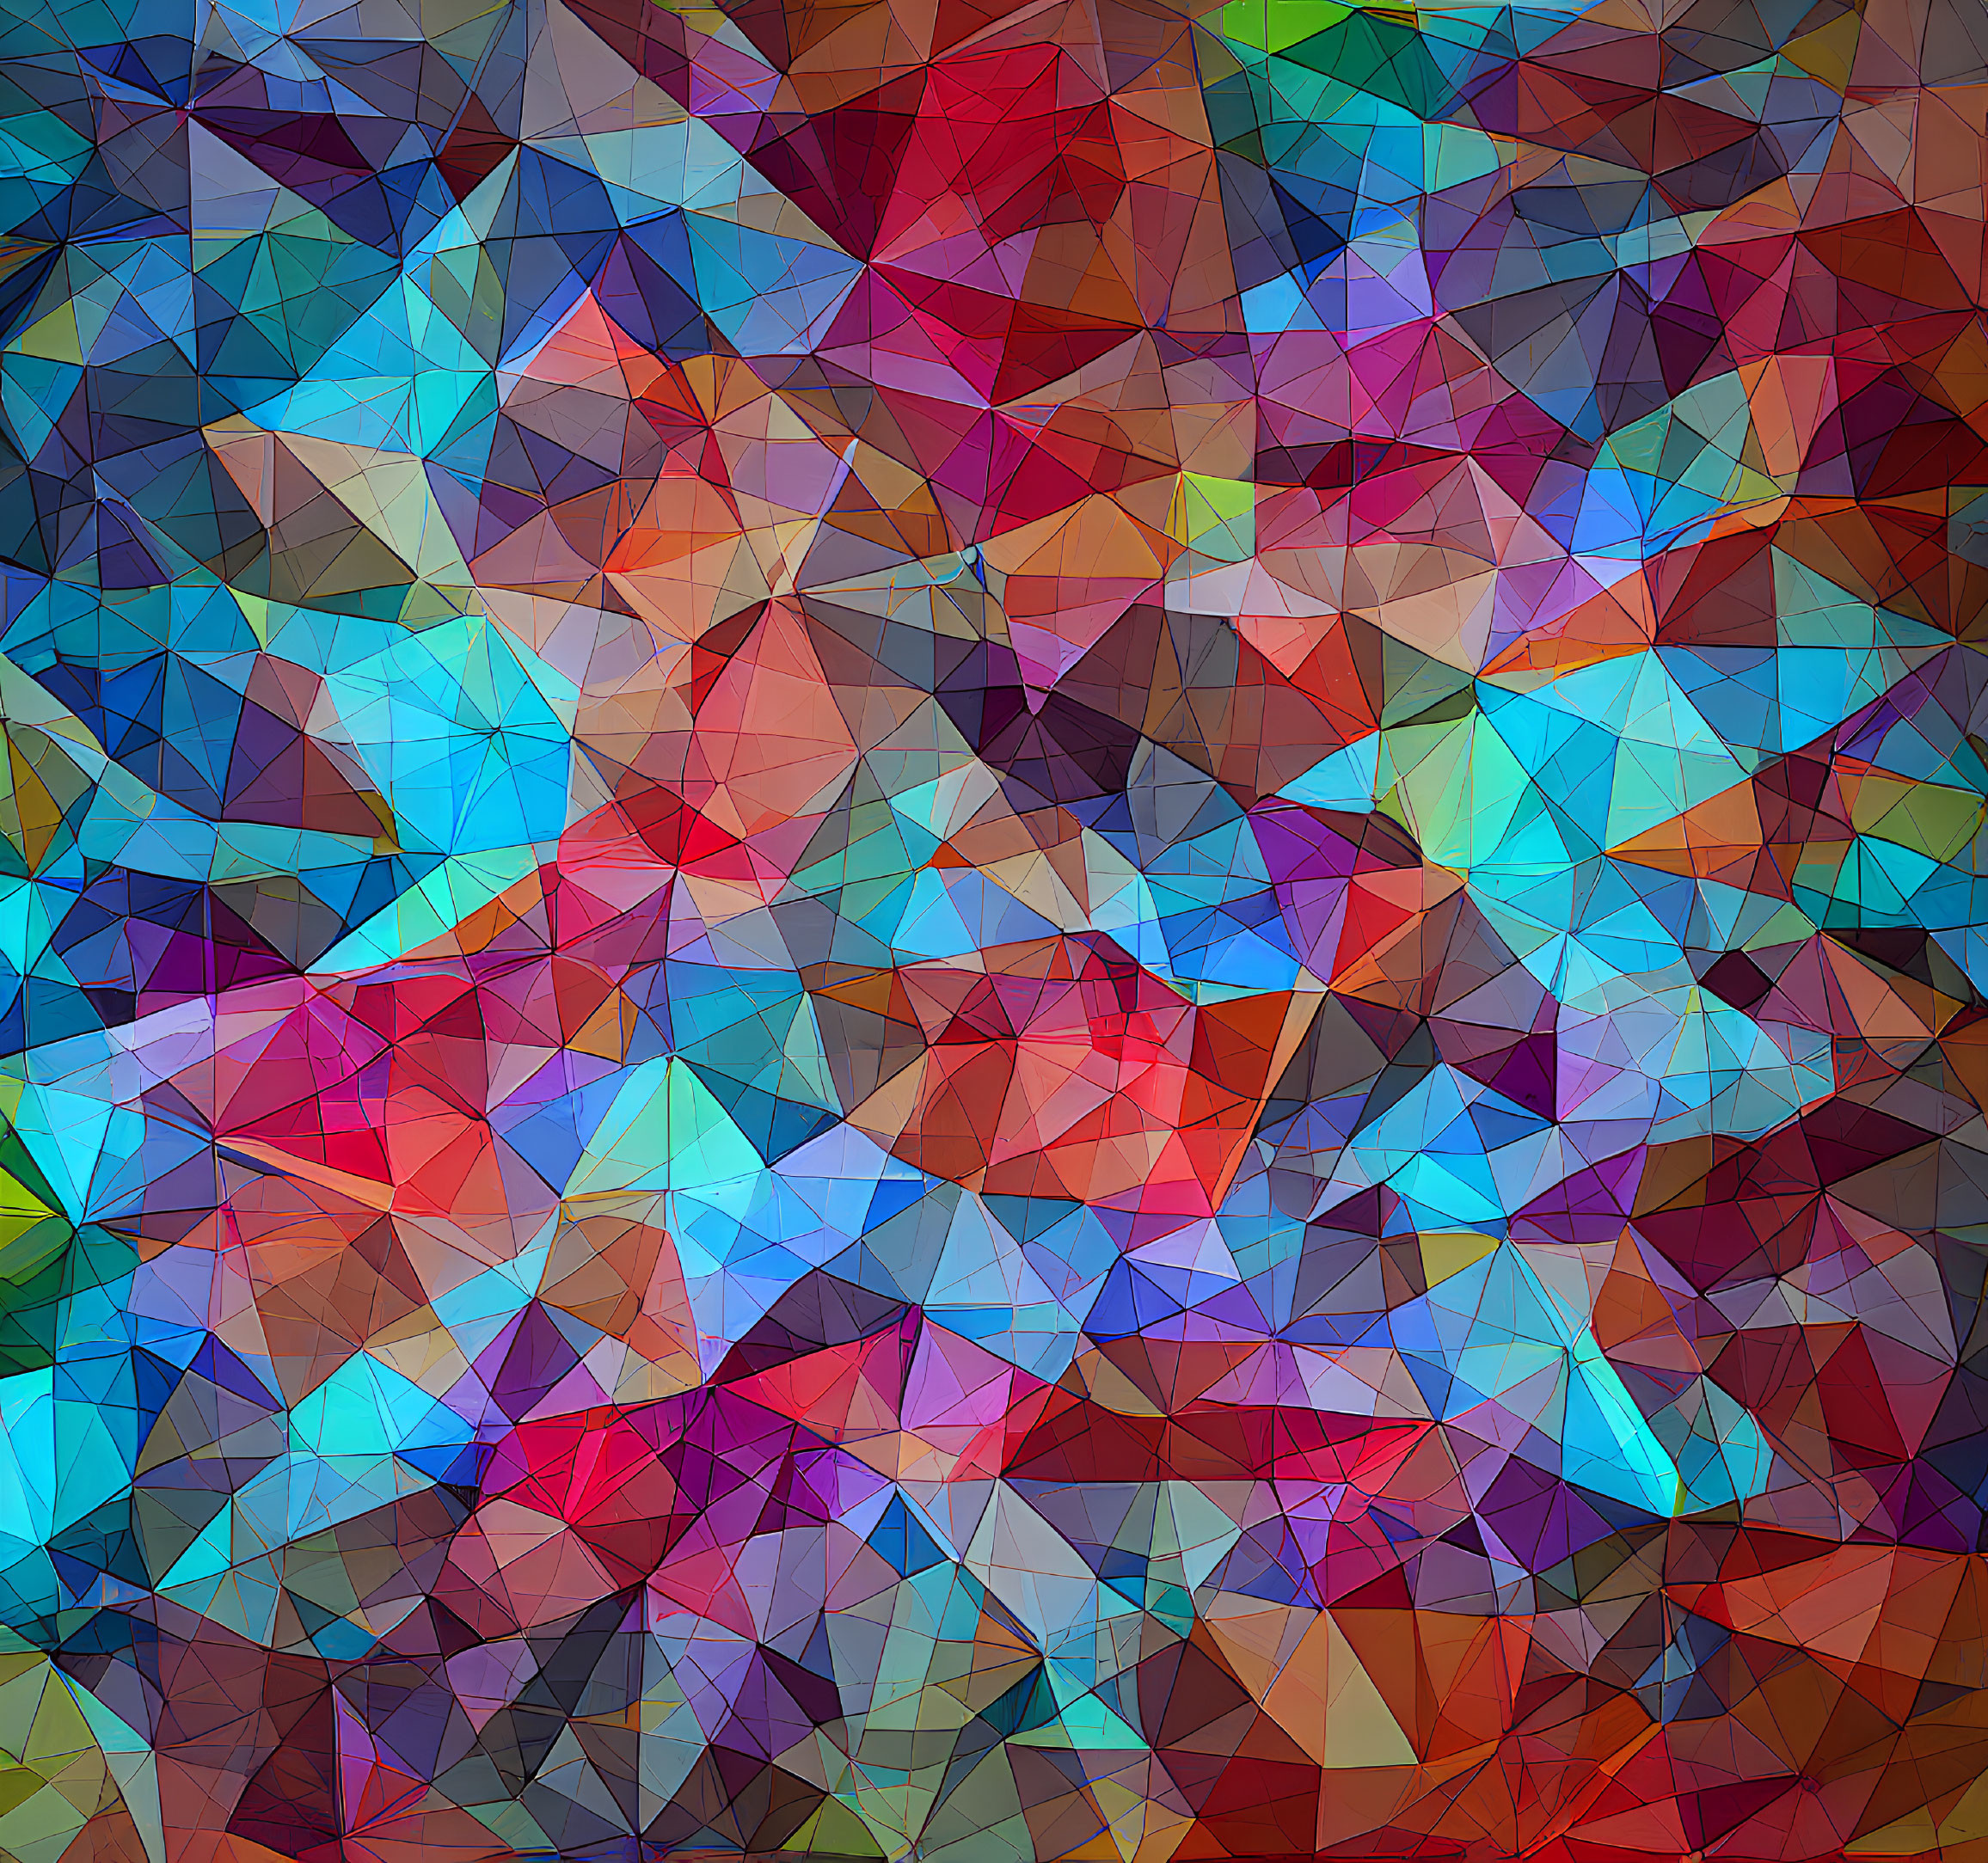 Colorful Abstract Geometric Mosaic with Interlocking Triangles